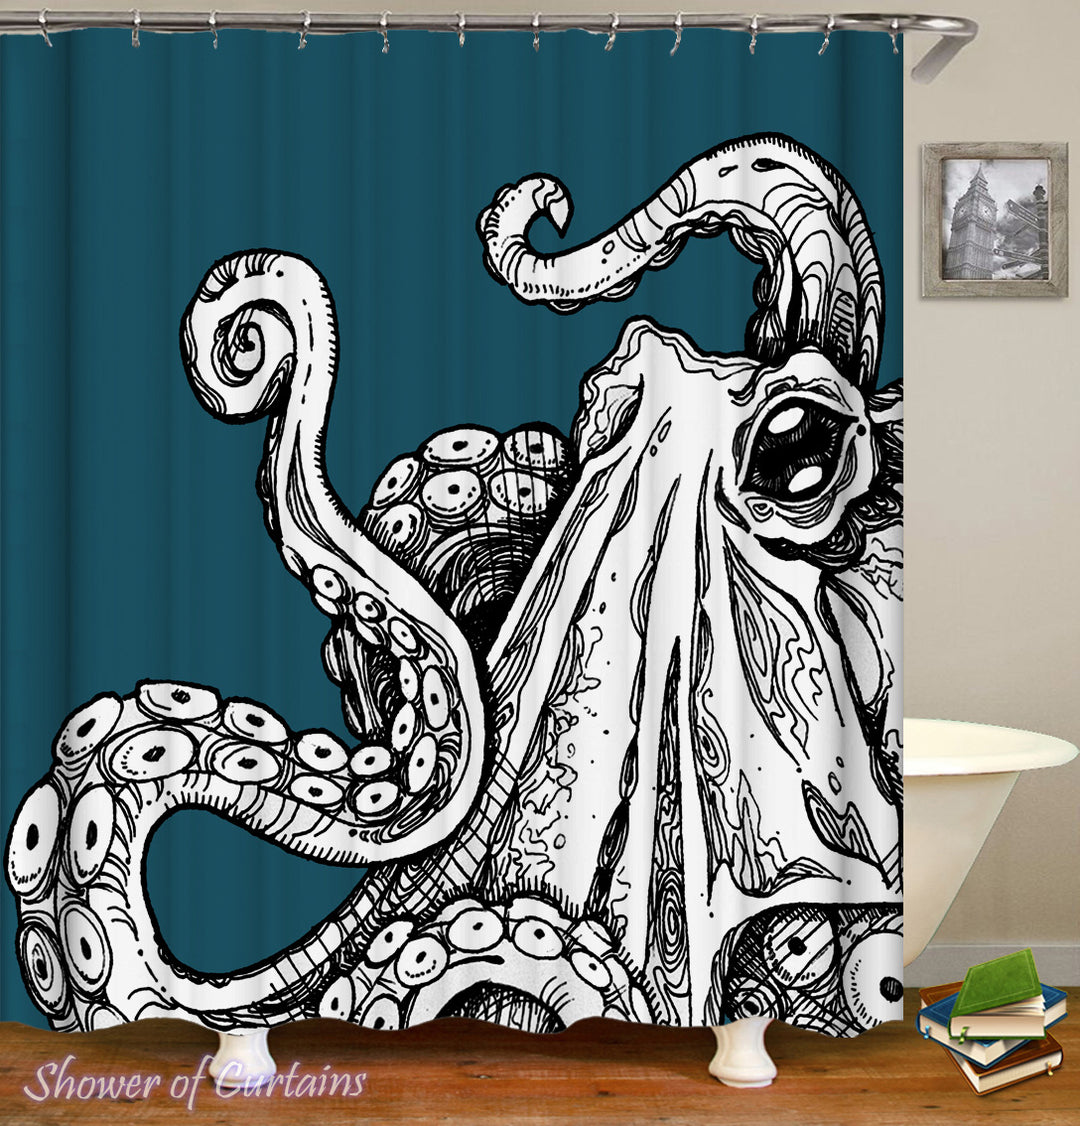 Octopus Shower Curtain of Black & White Octopus Over Turquoise